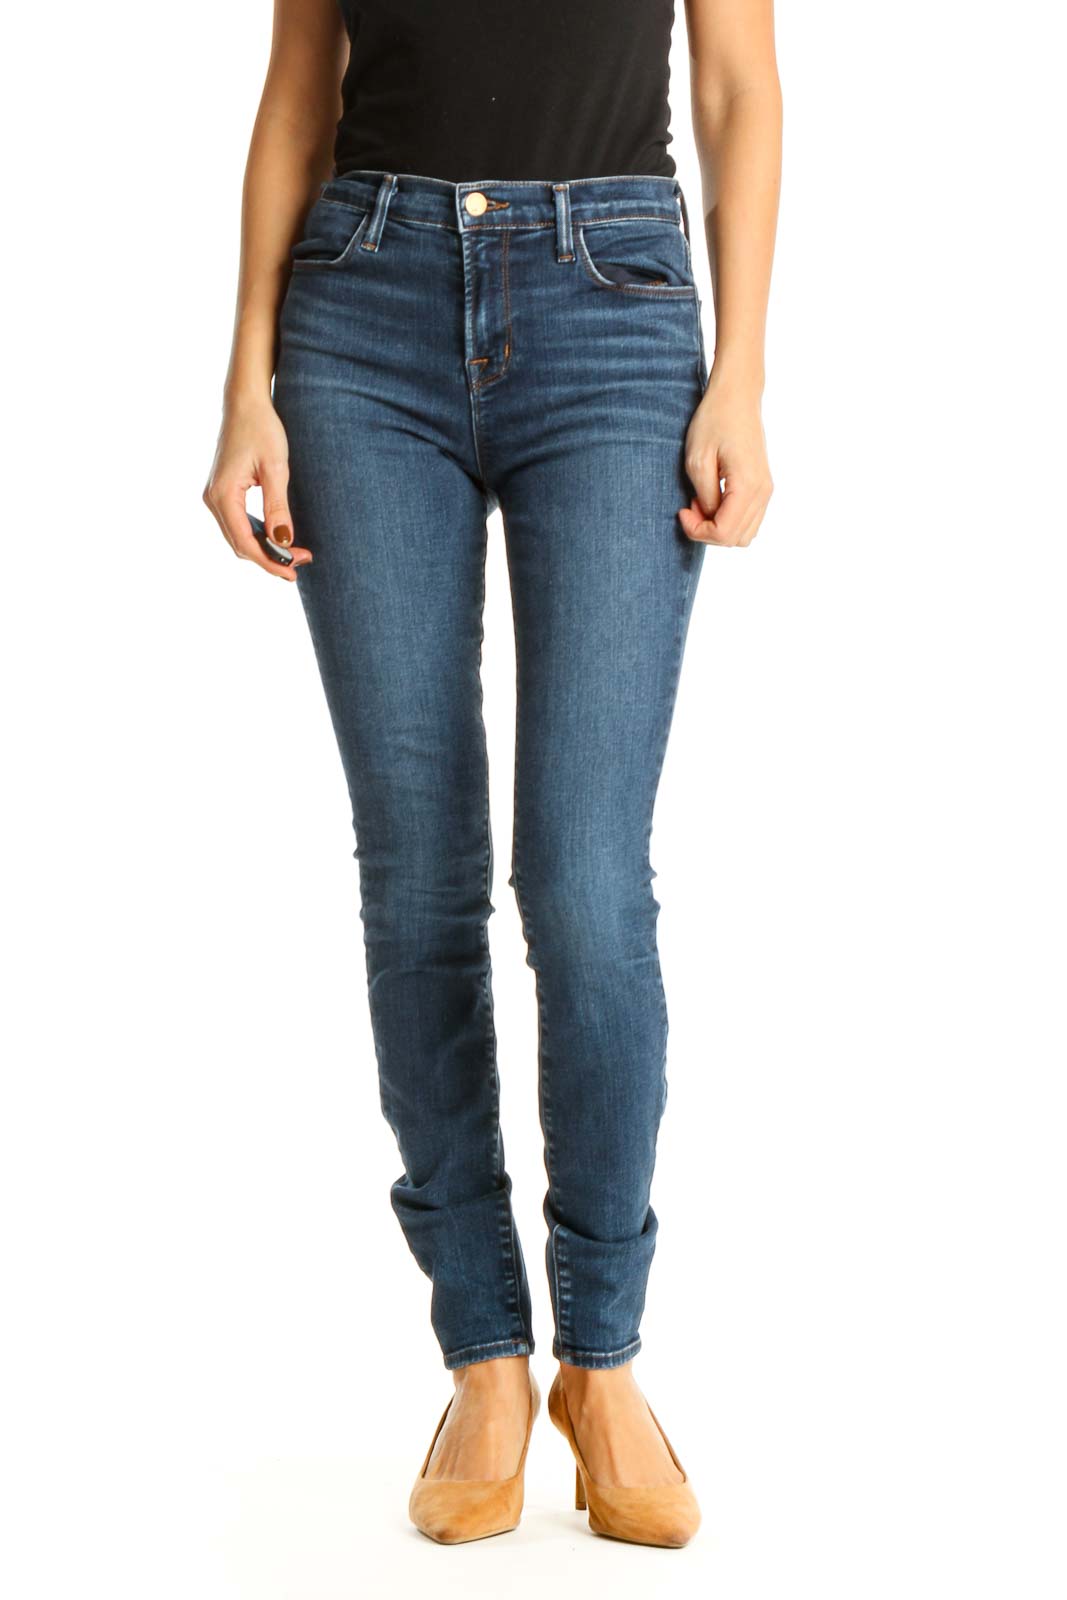 Blue High-Waisted Skinny Jeans Front